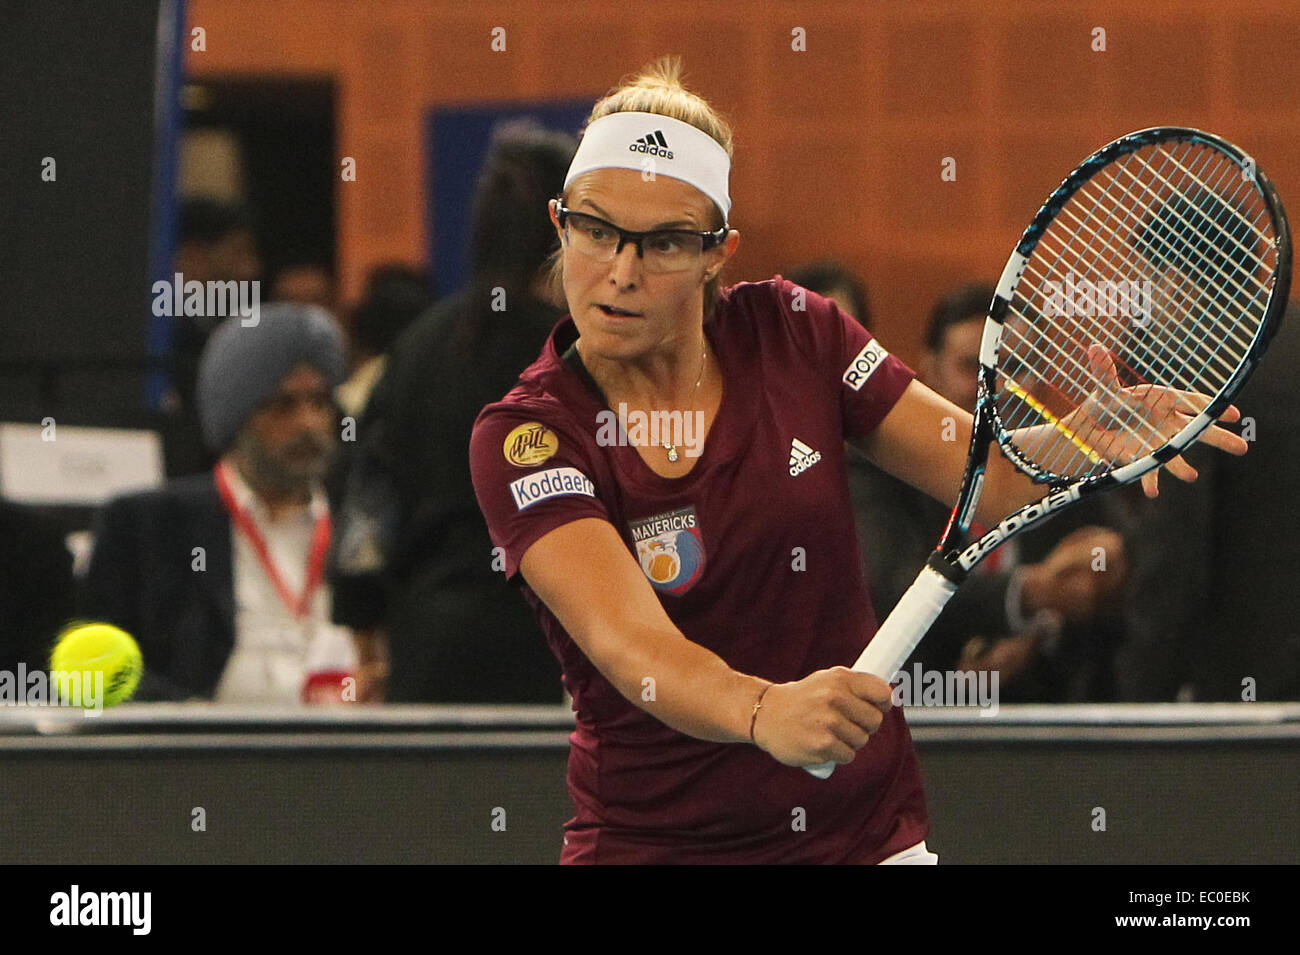 New Delhi, India. 6th Dec, 2014. Kirsten Flipkens of Manila Mavericks hits a return during the match against Indian Aces at the Indian Leg of the International Premier Tennis League in New Delhi, capital of India, Dec. 6, 2014. Indian Aces won by 26-25. © Zheng Huansong/Xinhua/Alamy Live News Stock Photo